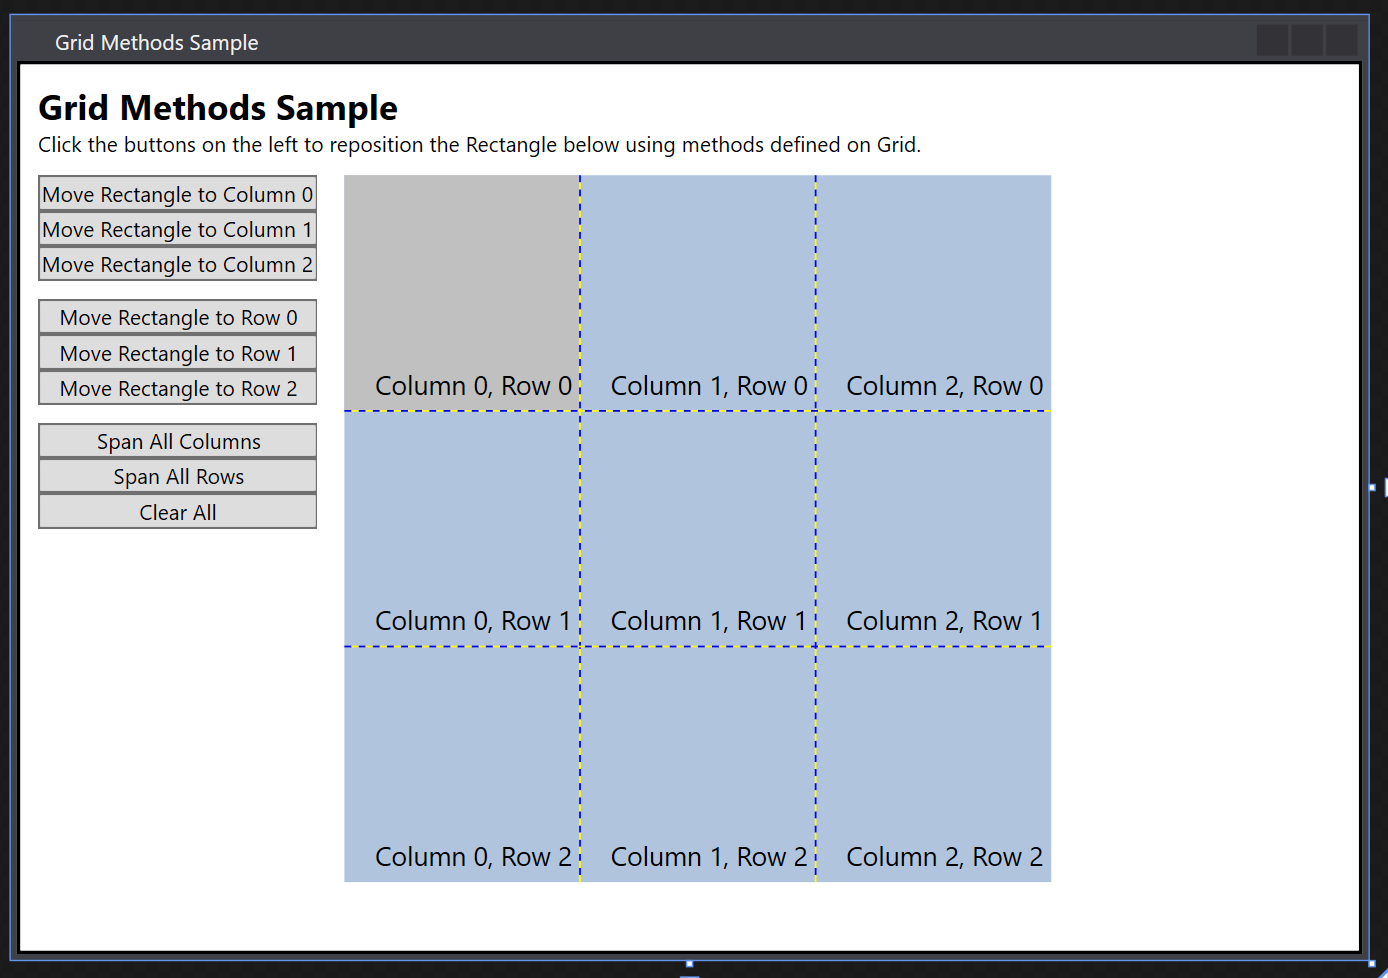 a screenshot depicts a WPF user interface with two columns, the right side has a 3 x 3 grid and the left has buttons to move a colored rectangle between the columns and rows of the grid